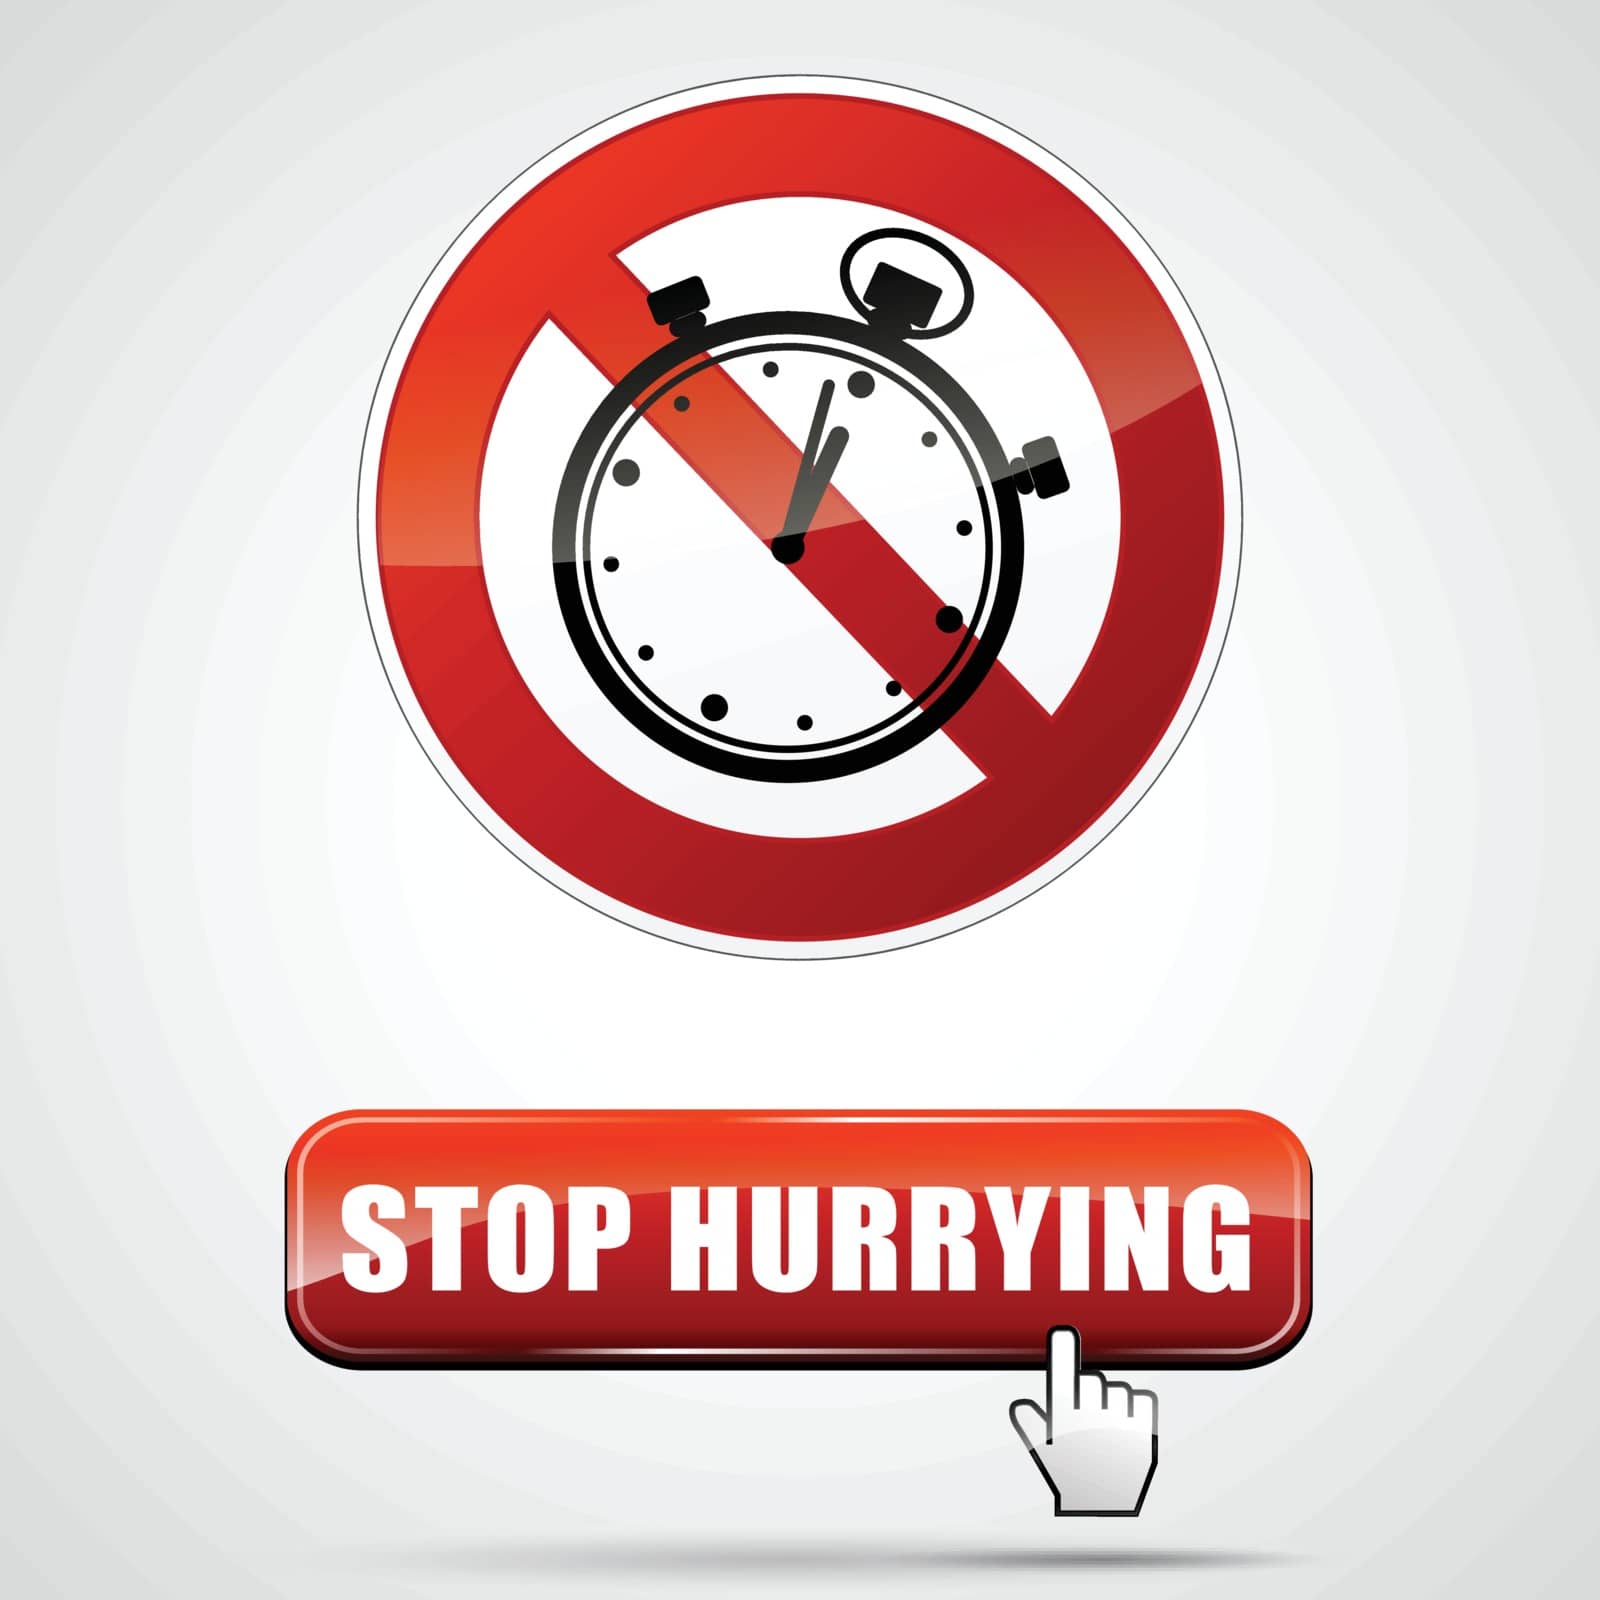 Illustration of stop hurrying sign and button concept